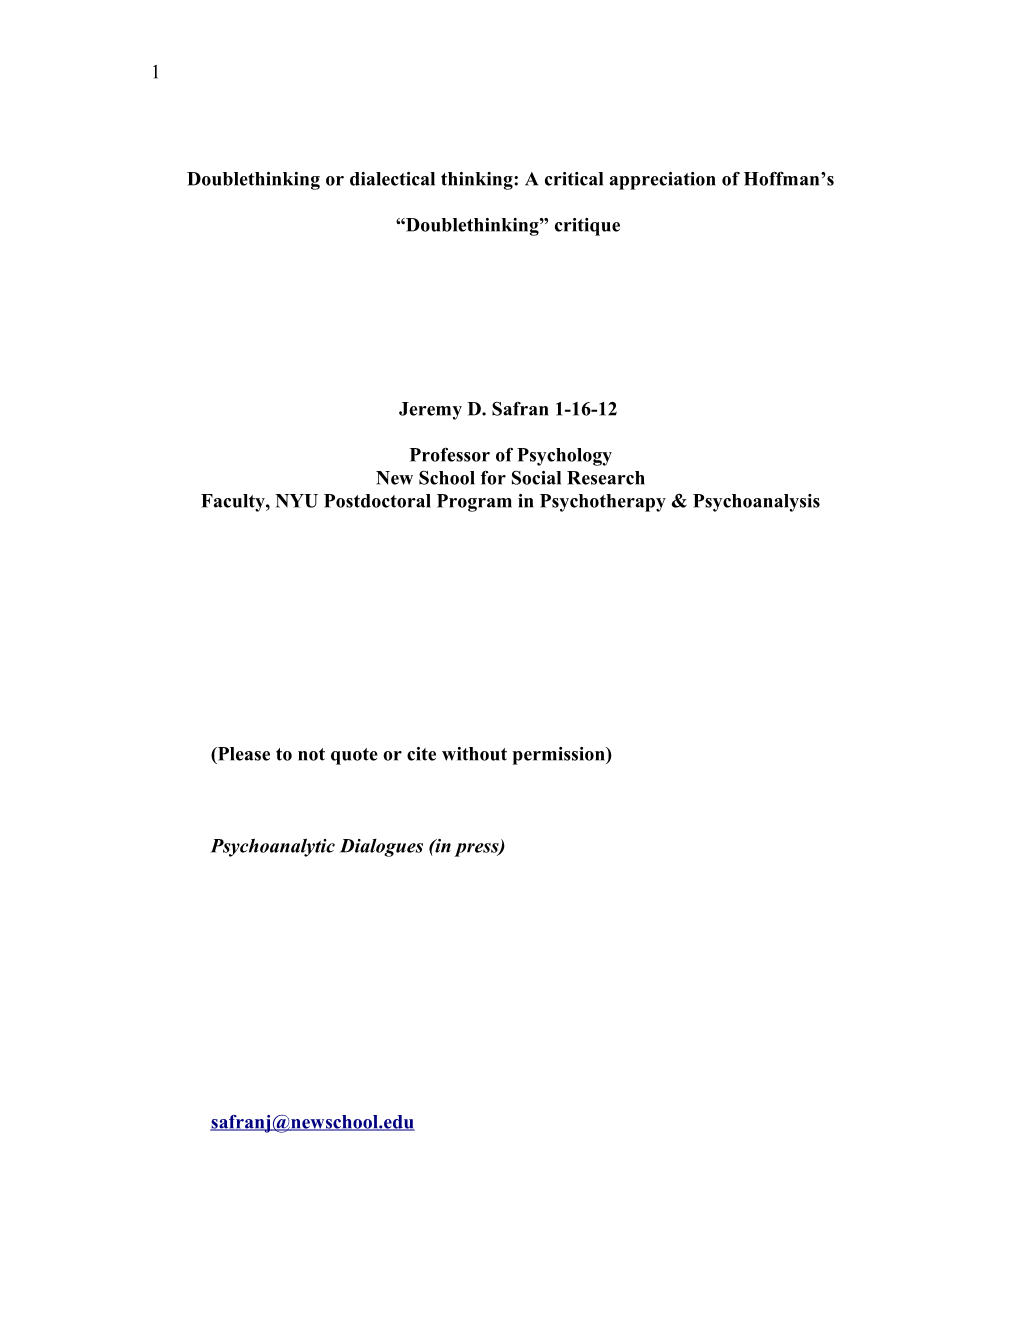 Doublethinkingor Dialectical Thinking: a Critical Appreciation of Hoffman S Doublethinking